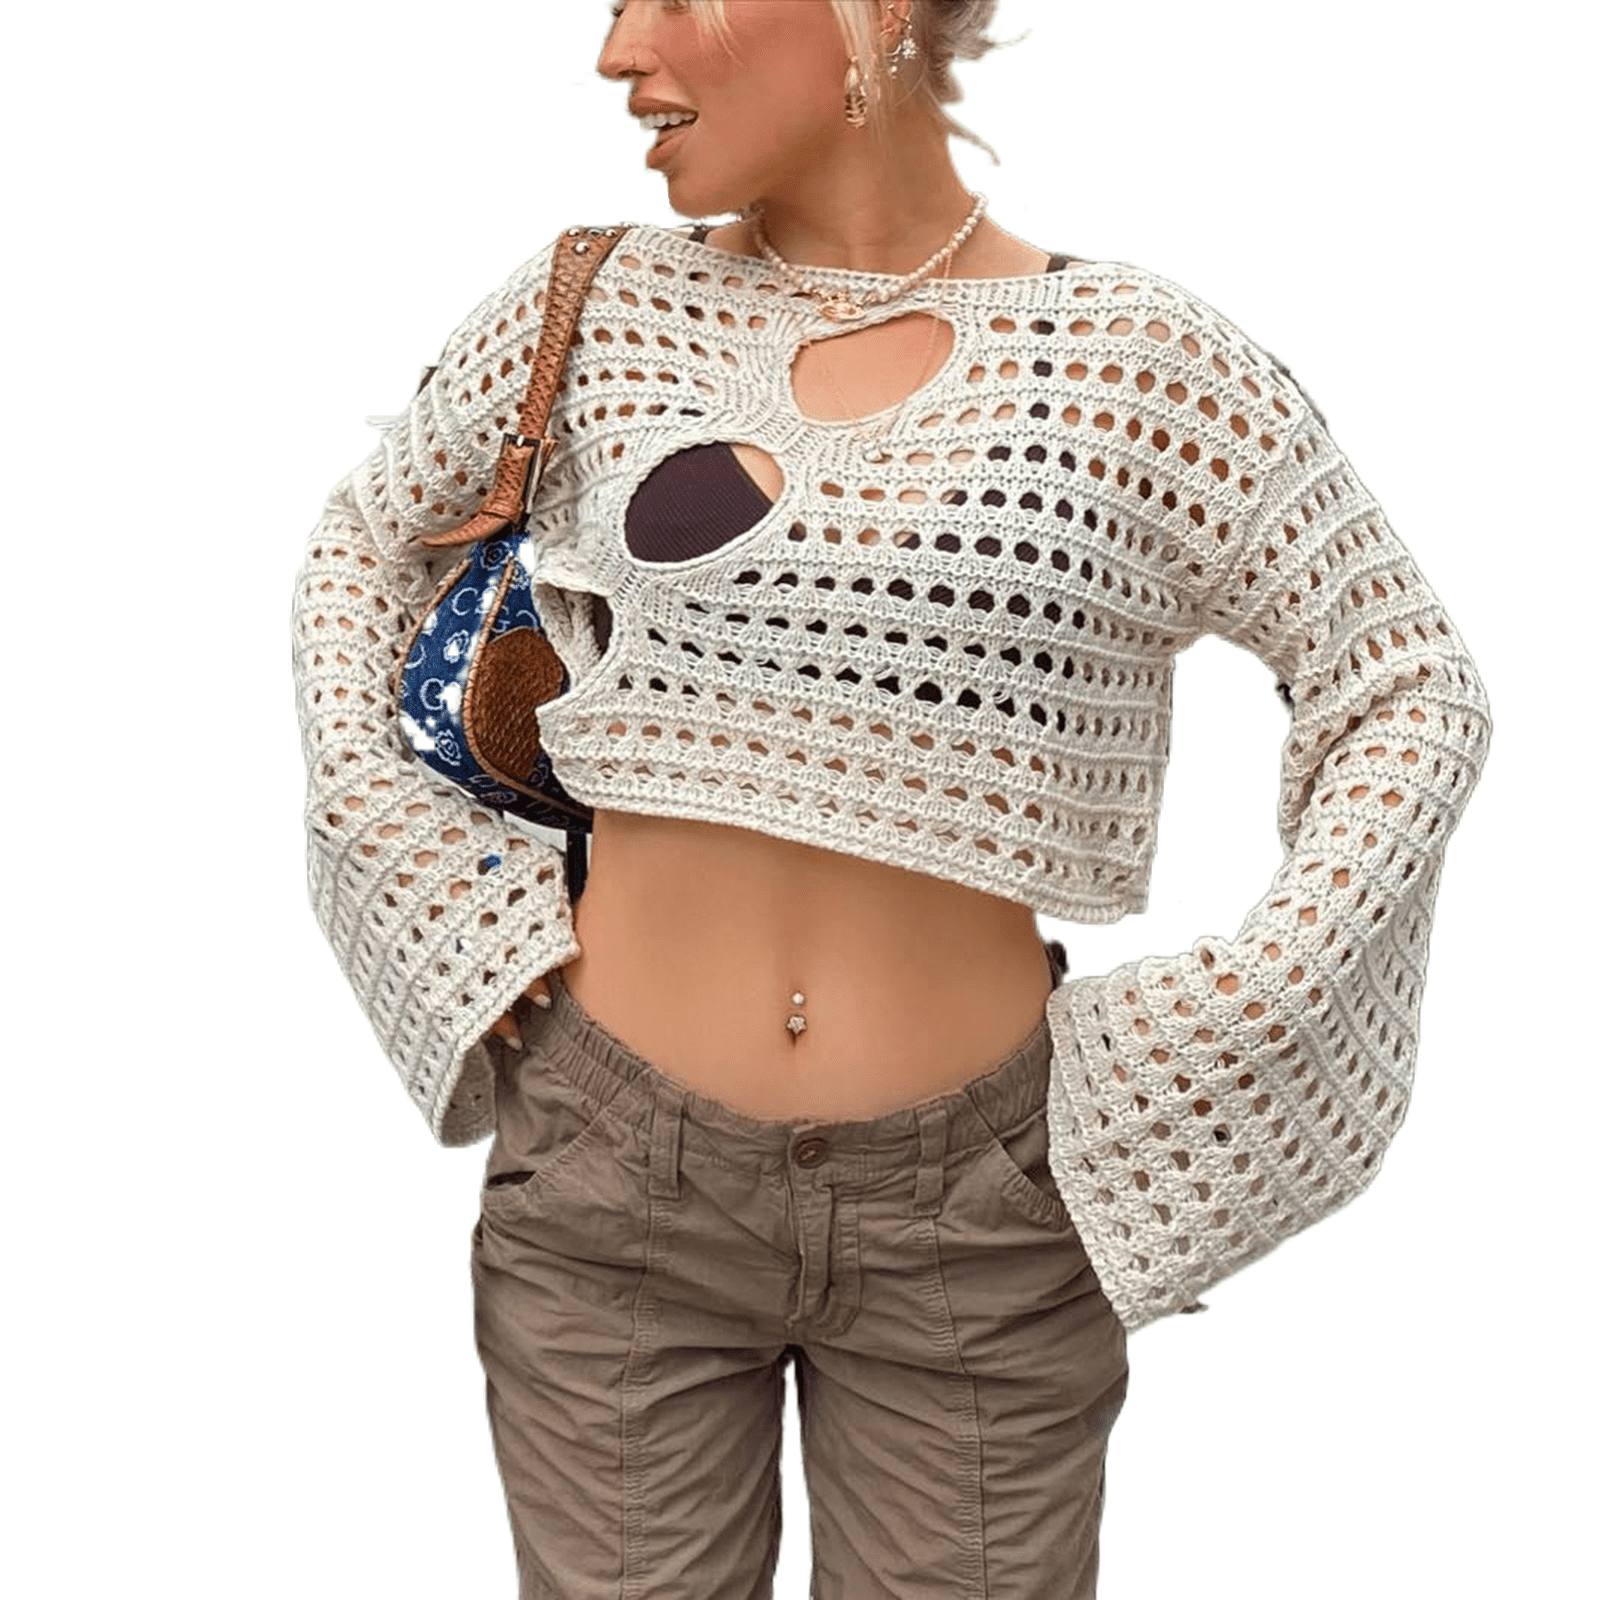 Women Crochet Crop Top Long Sleeve Square Neck Hollow Out Knit